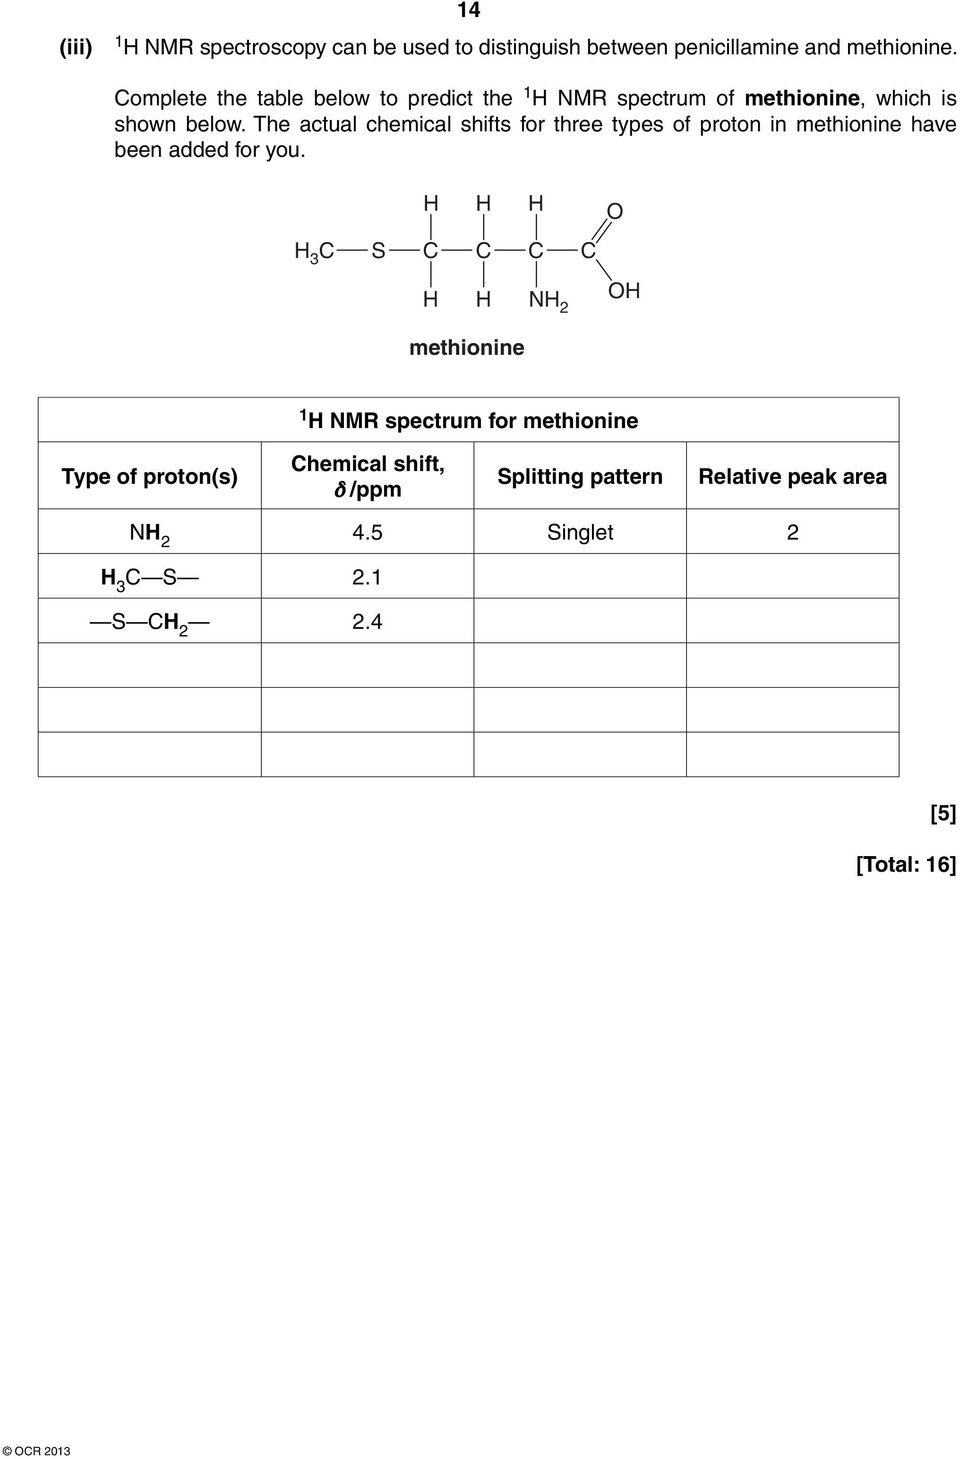 The actual chemical shifts for three types of proton in methionine have been added for you.